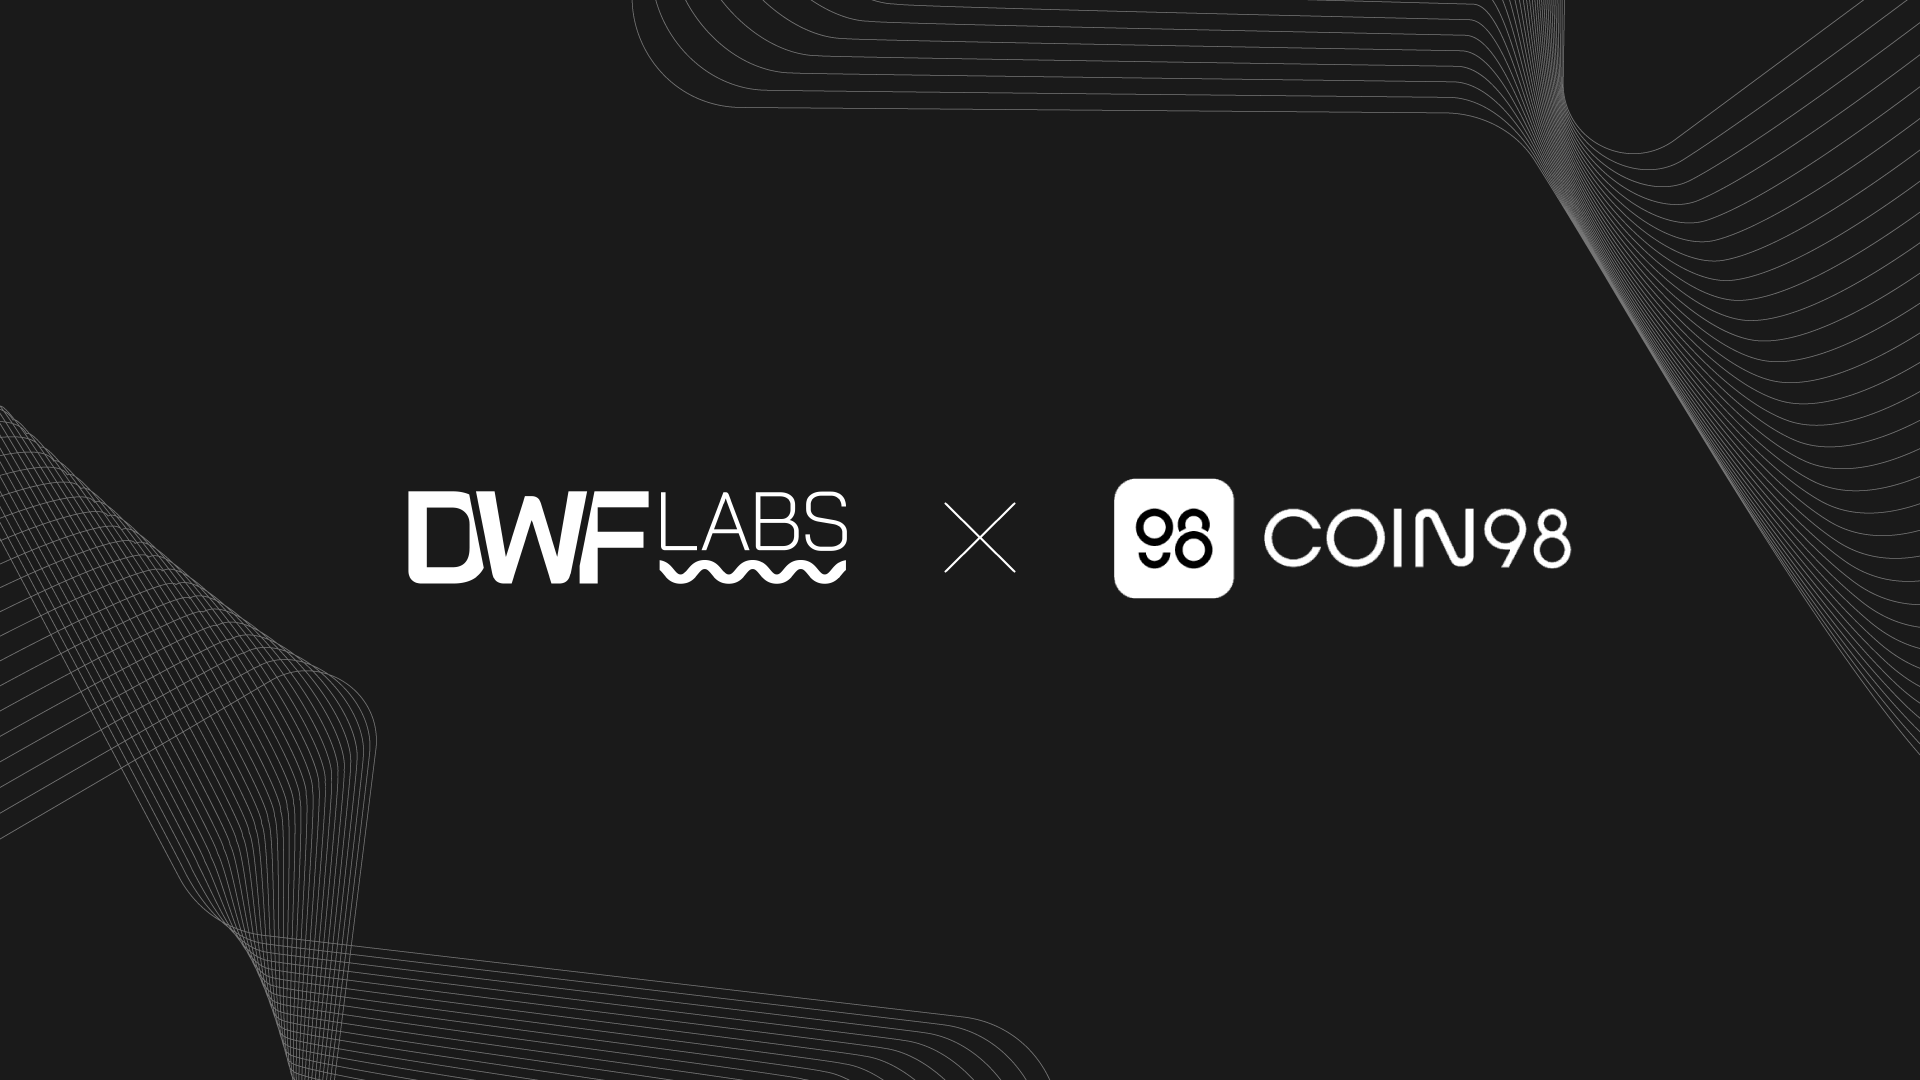 Coin98 Secures Millions in Investment from DWF Labs